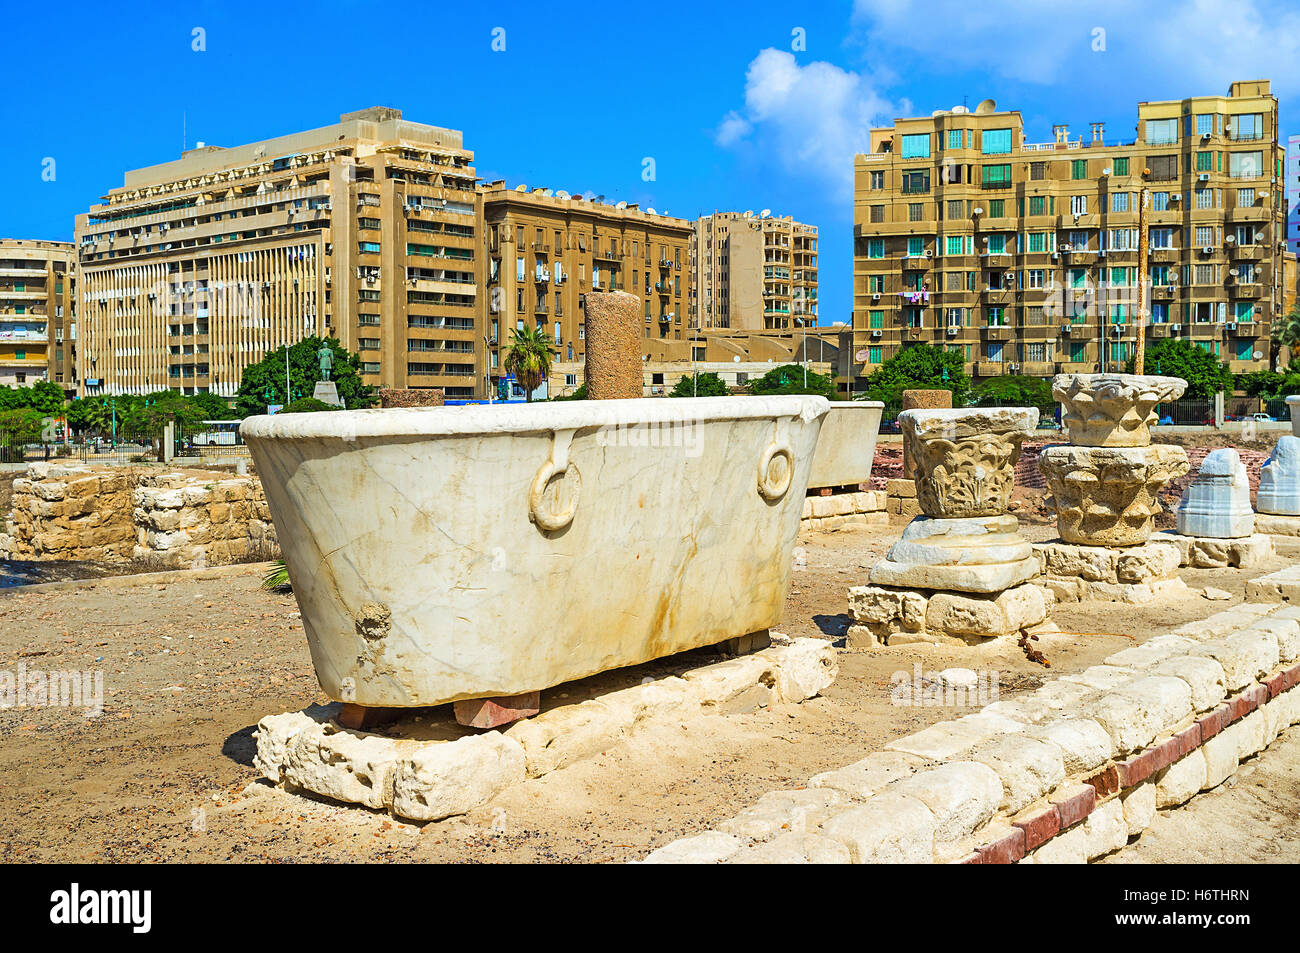 The beautiful marble bath in archaeological site of Alexandria, Egypt. Stock Photo